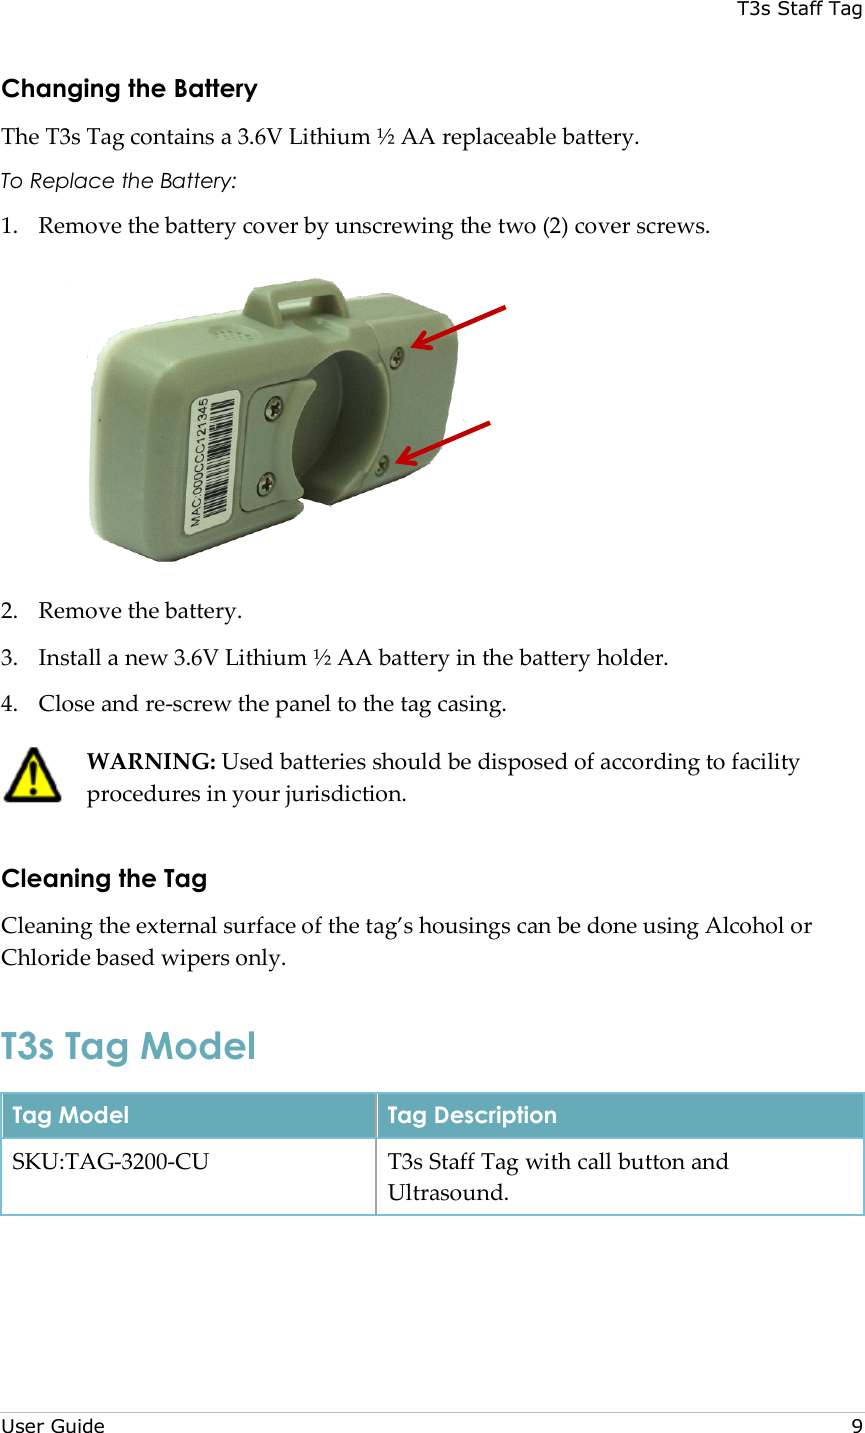 T3s Staff Tag  User Guide     9 Changing the Battery The T3s Tag contains a 3.6V Lithium ½ AA replaceable battery. To Replace the Battery: 1. Remove the battery cover by unscrewing the two (2) cover screws.  2. Remove the battery. 3. Install a new 3.6V Lithium ½ AA battery in the battery holder. 4. Close and re-screw the panel to the tag casing.  WARNING: Used batteries should be disposed of according to facility procedures in your jurisdiction. Cleaning the Tag Cleaning the external surface of the tag’s housings can be done using Alcohol or Chloride based wipers only. T3s Tag Model Tag Model Tag Description SKU:TAG-3200-CU T3s Staff Tag with call button and Ultrasound.  